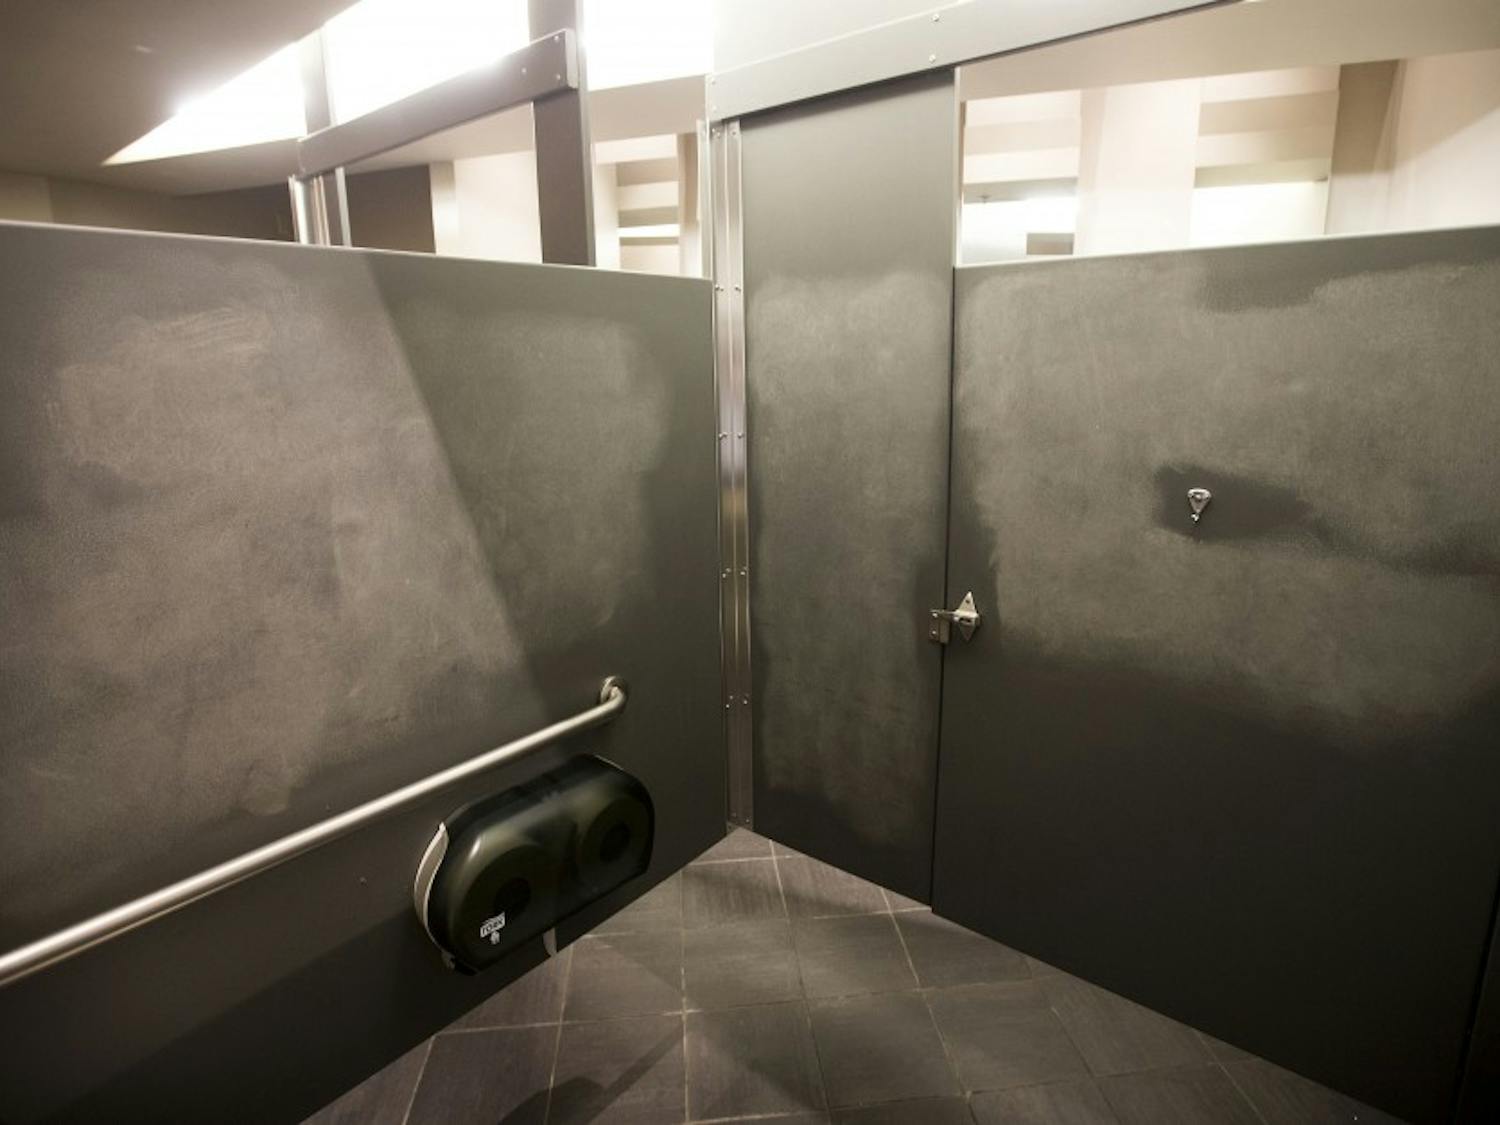 A freshly-cleaned bathroom stall in the Palo Verde East building is seen on Friday, Nov. 11, after a graphic message was allegedly written on the walls.